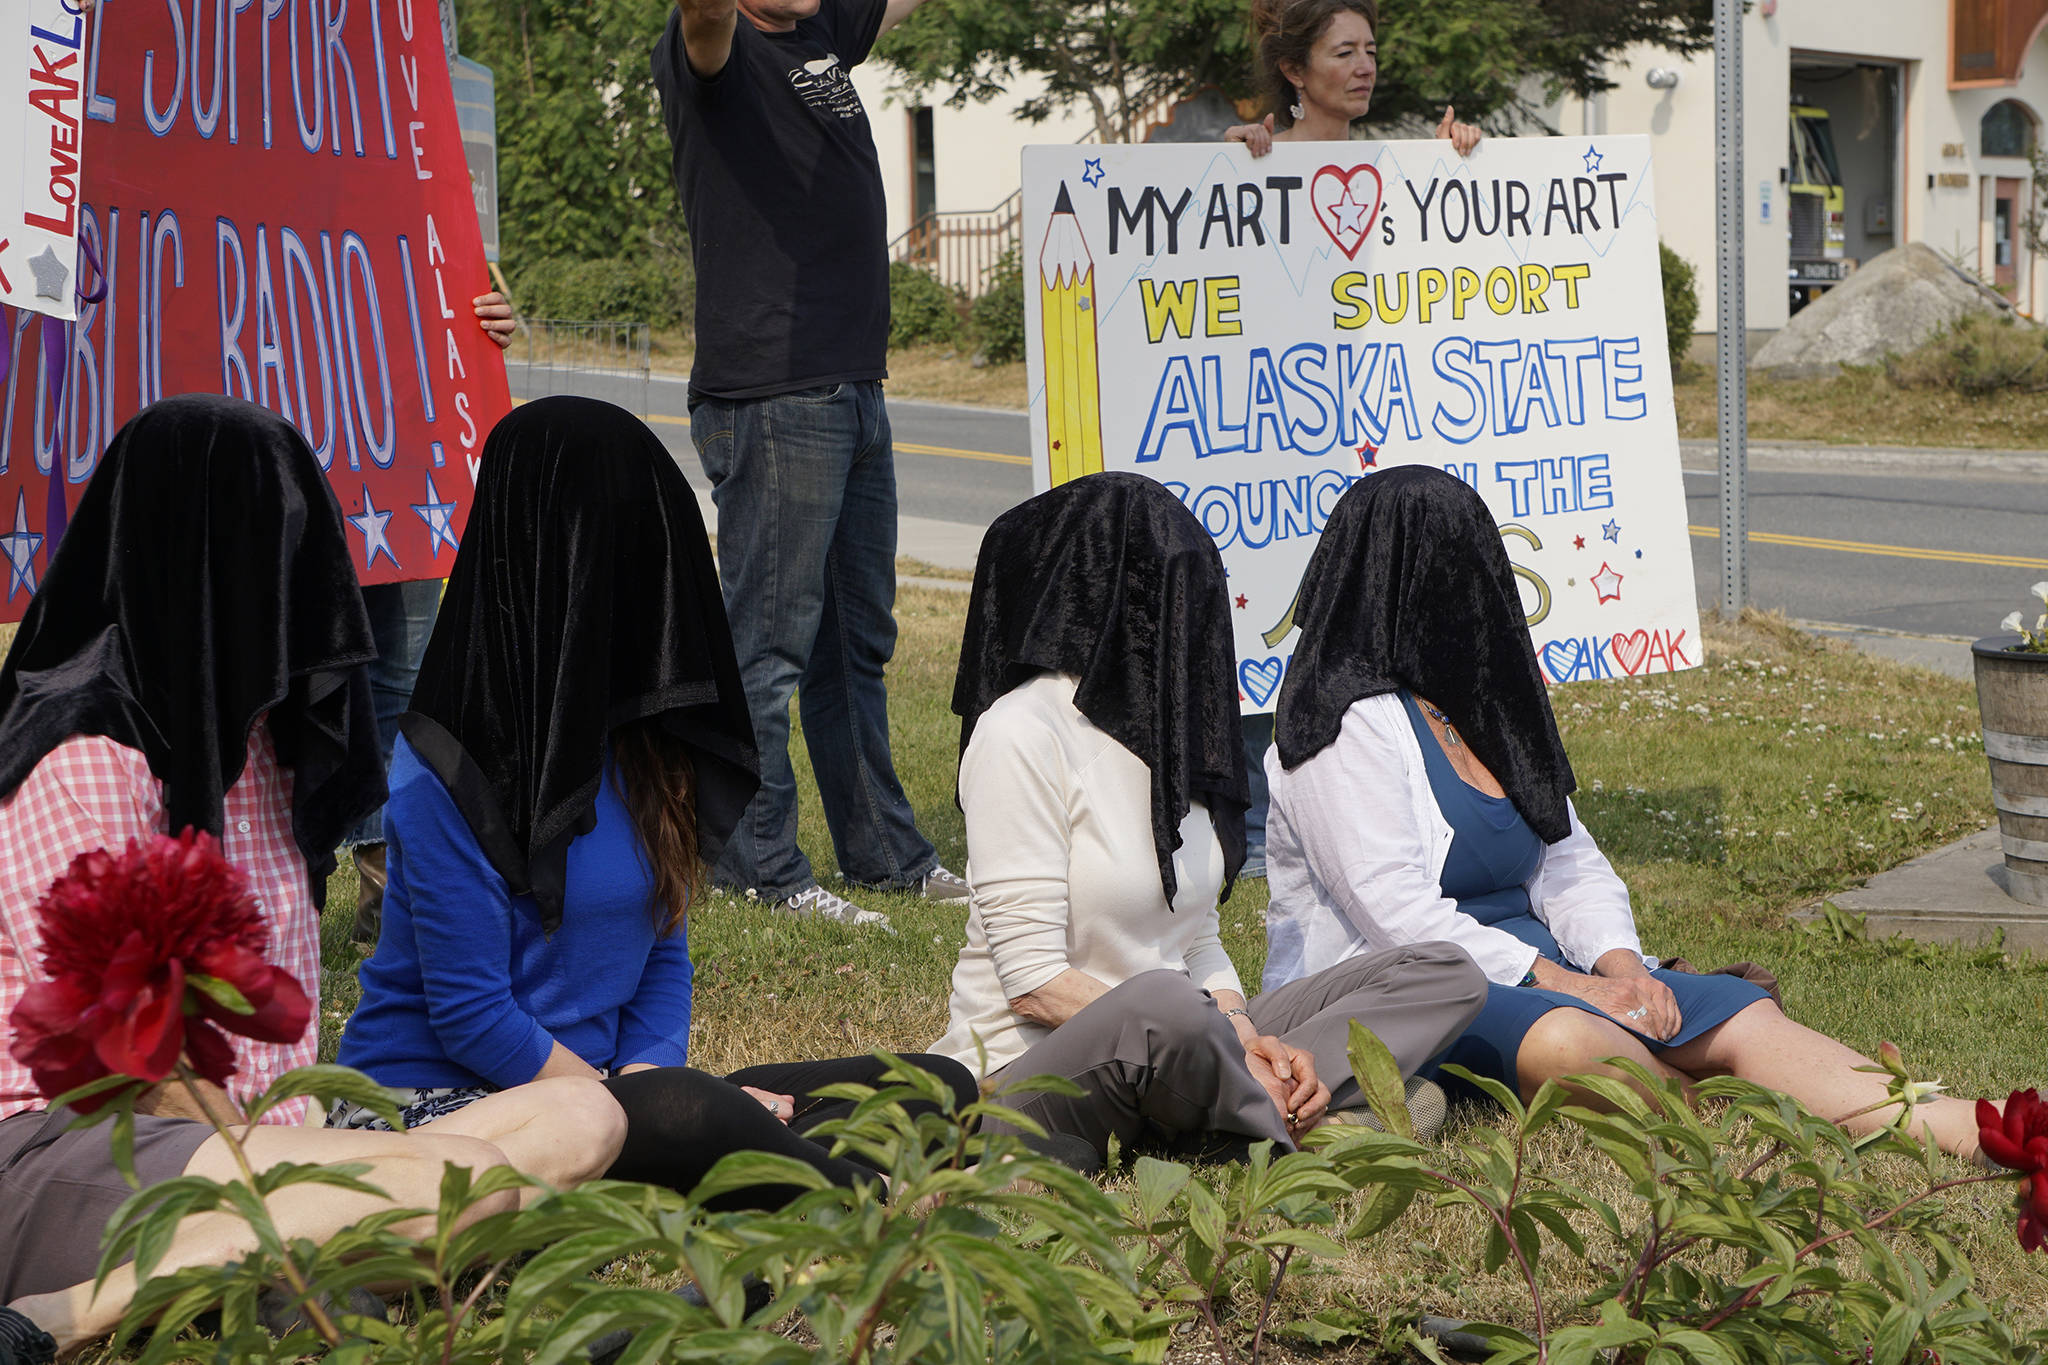 Photo by Michael Armstrong / Homer News                                Women draped in black sit down Tuesday at WKFL Park in Homer as part of a statewide art intervention to protest Gov. Mike Dunleavy’s veto of a $2.8 million state appropriation to the Alaska State Council on the Arts. They also supported a general override of Dunleavy’s vetoes that will affect funding for the University of Alaska, public radio and other programs.